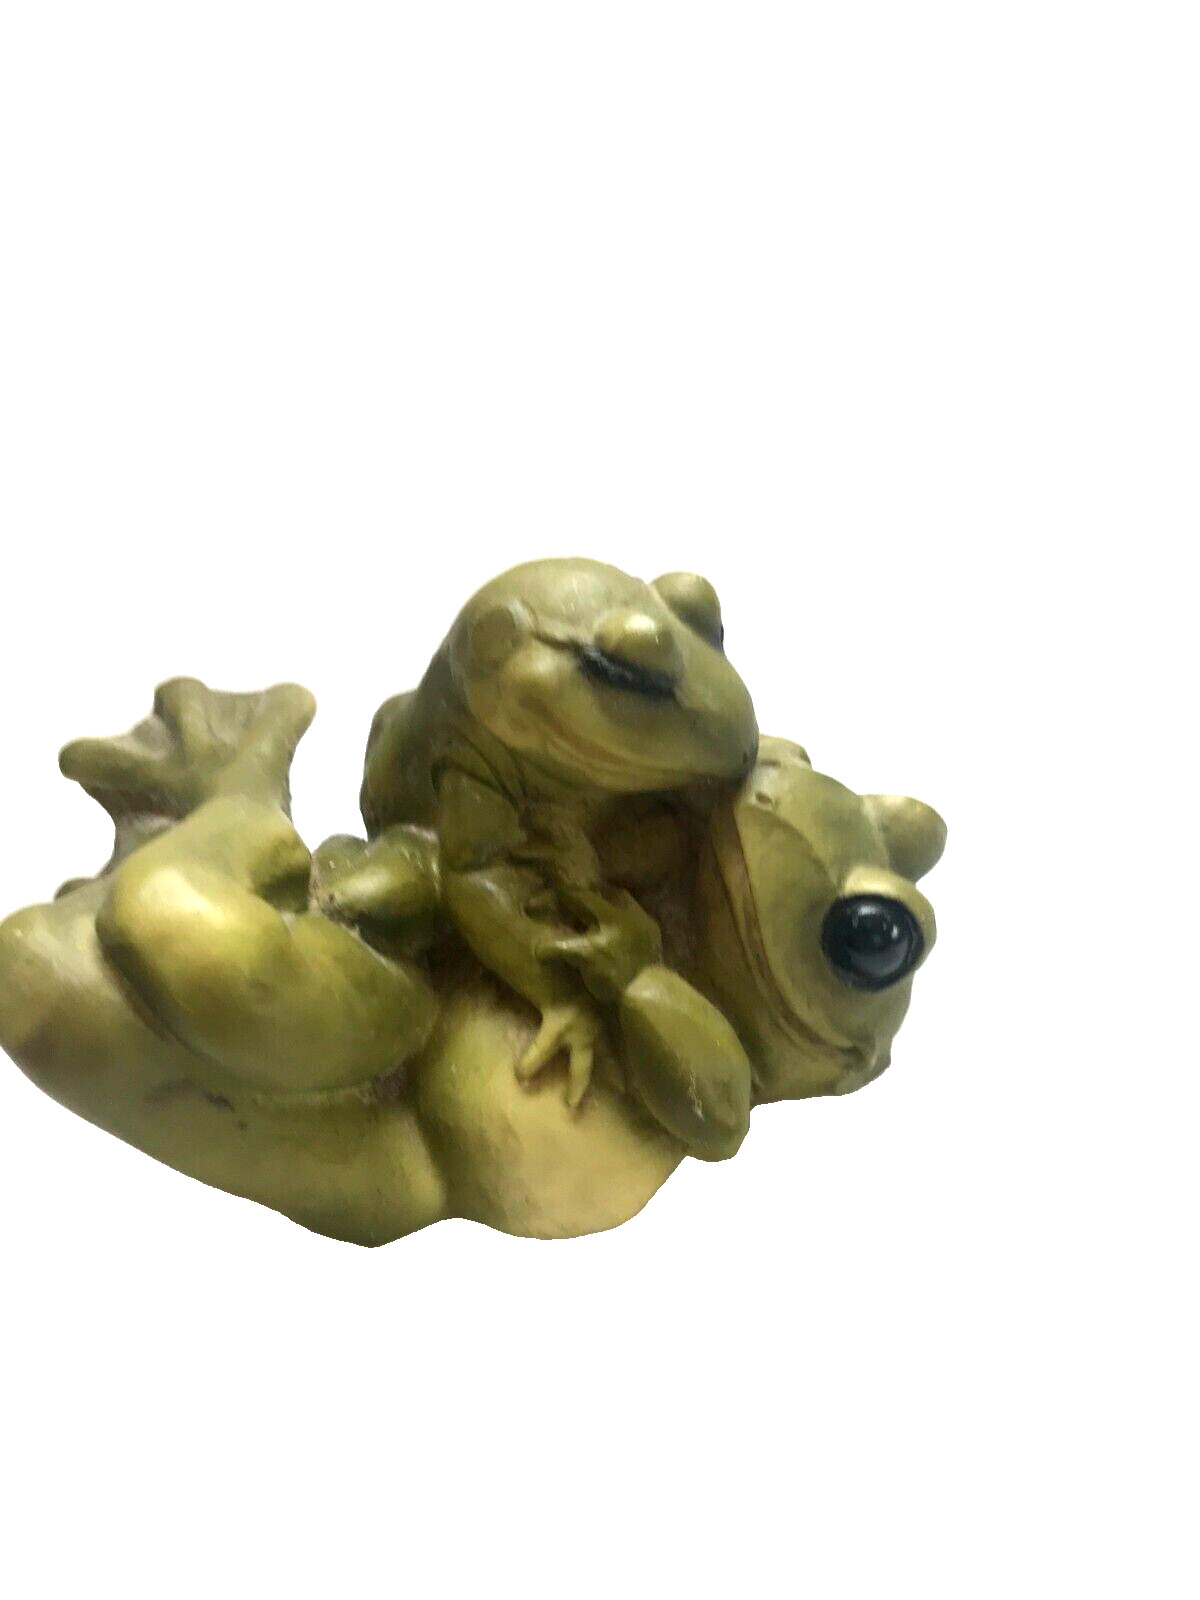 1988 CASTAGNA ITALY PAIR OF KISSING FROGS FIGURINE